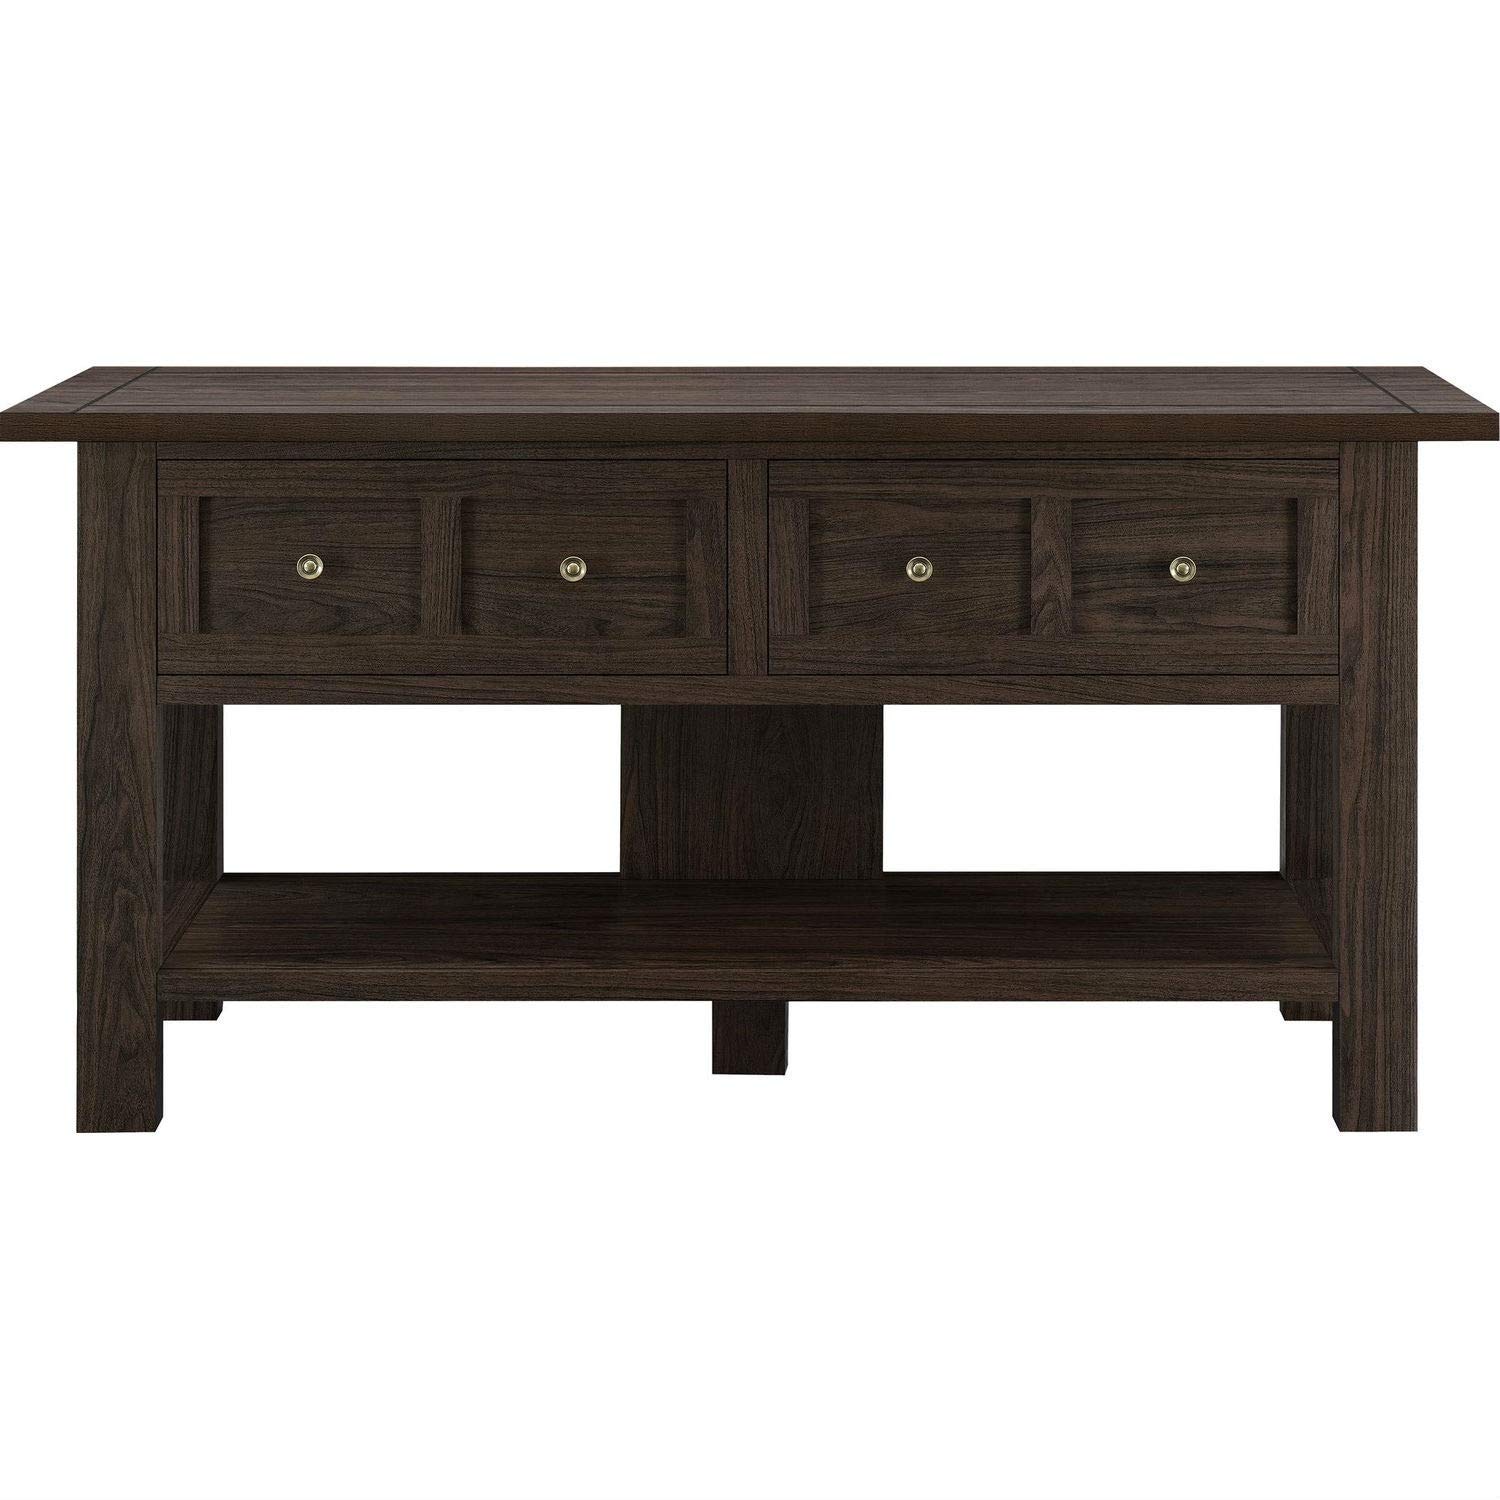 storage accent table find line with get quotations trustpurchase classic inch stand versatile console drawers retro bedroom furniture round antique nesting tables wood and metal